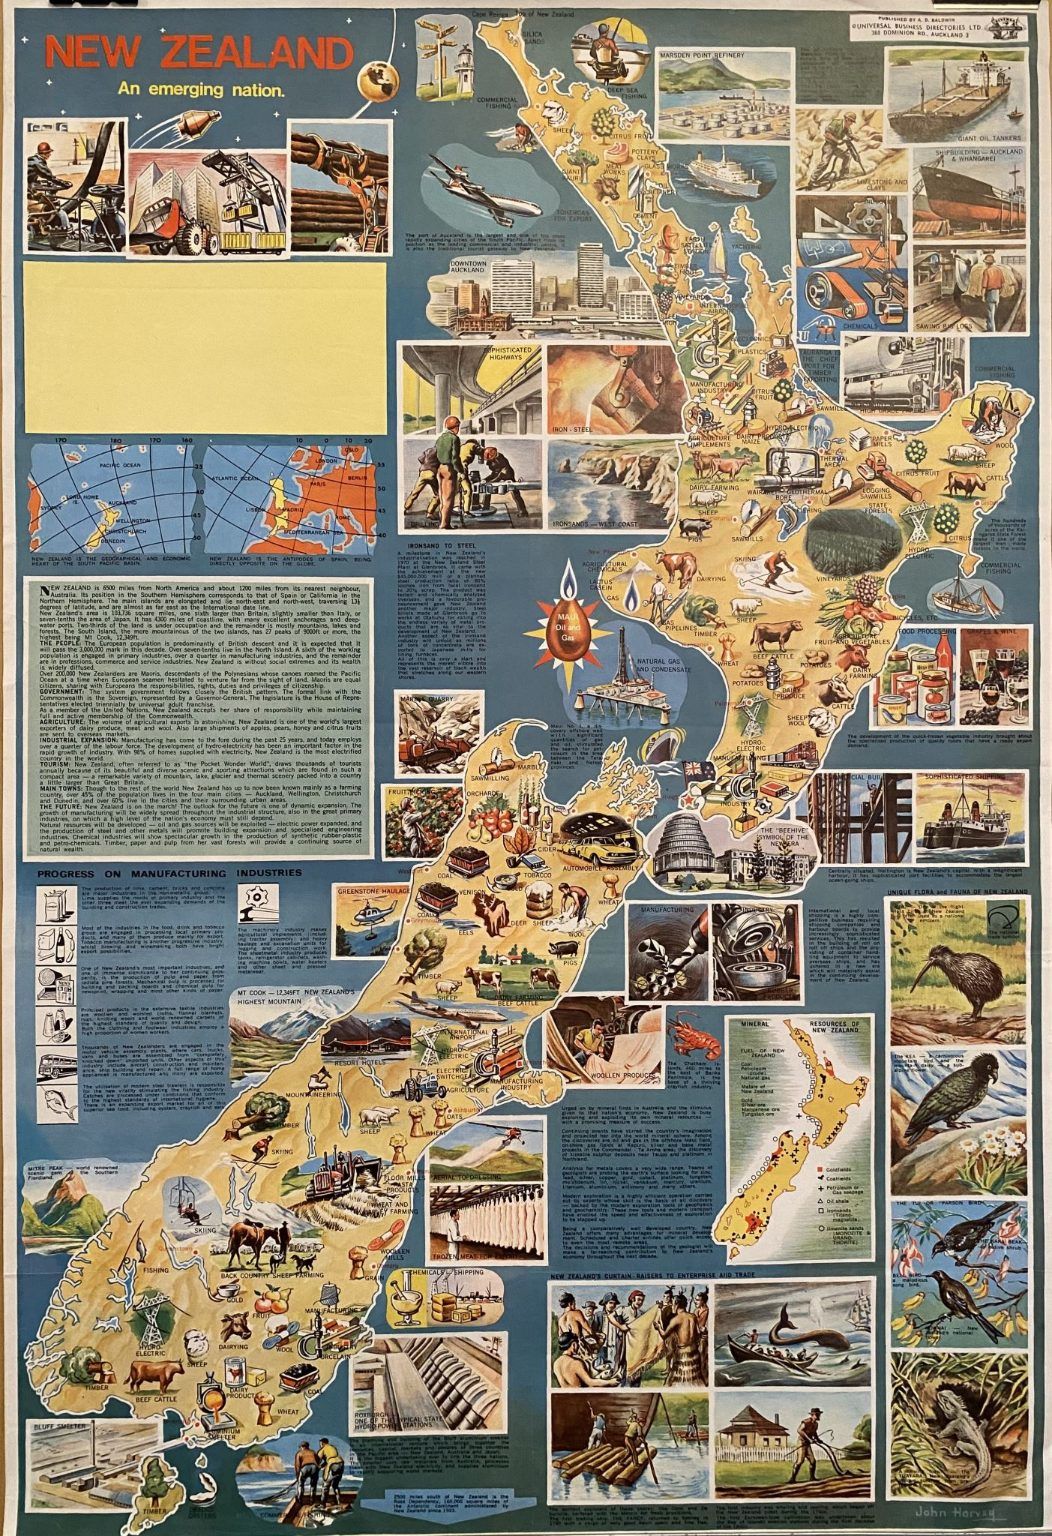 VINTAGE POSTER: New Zealand - An Emerging Nation